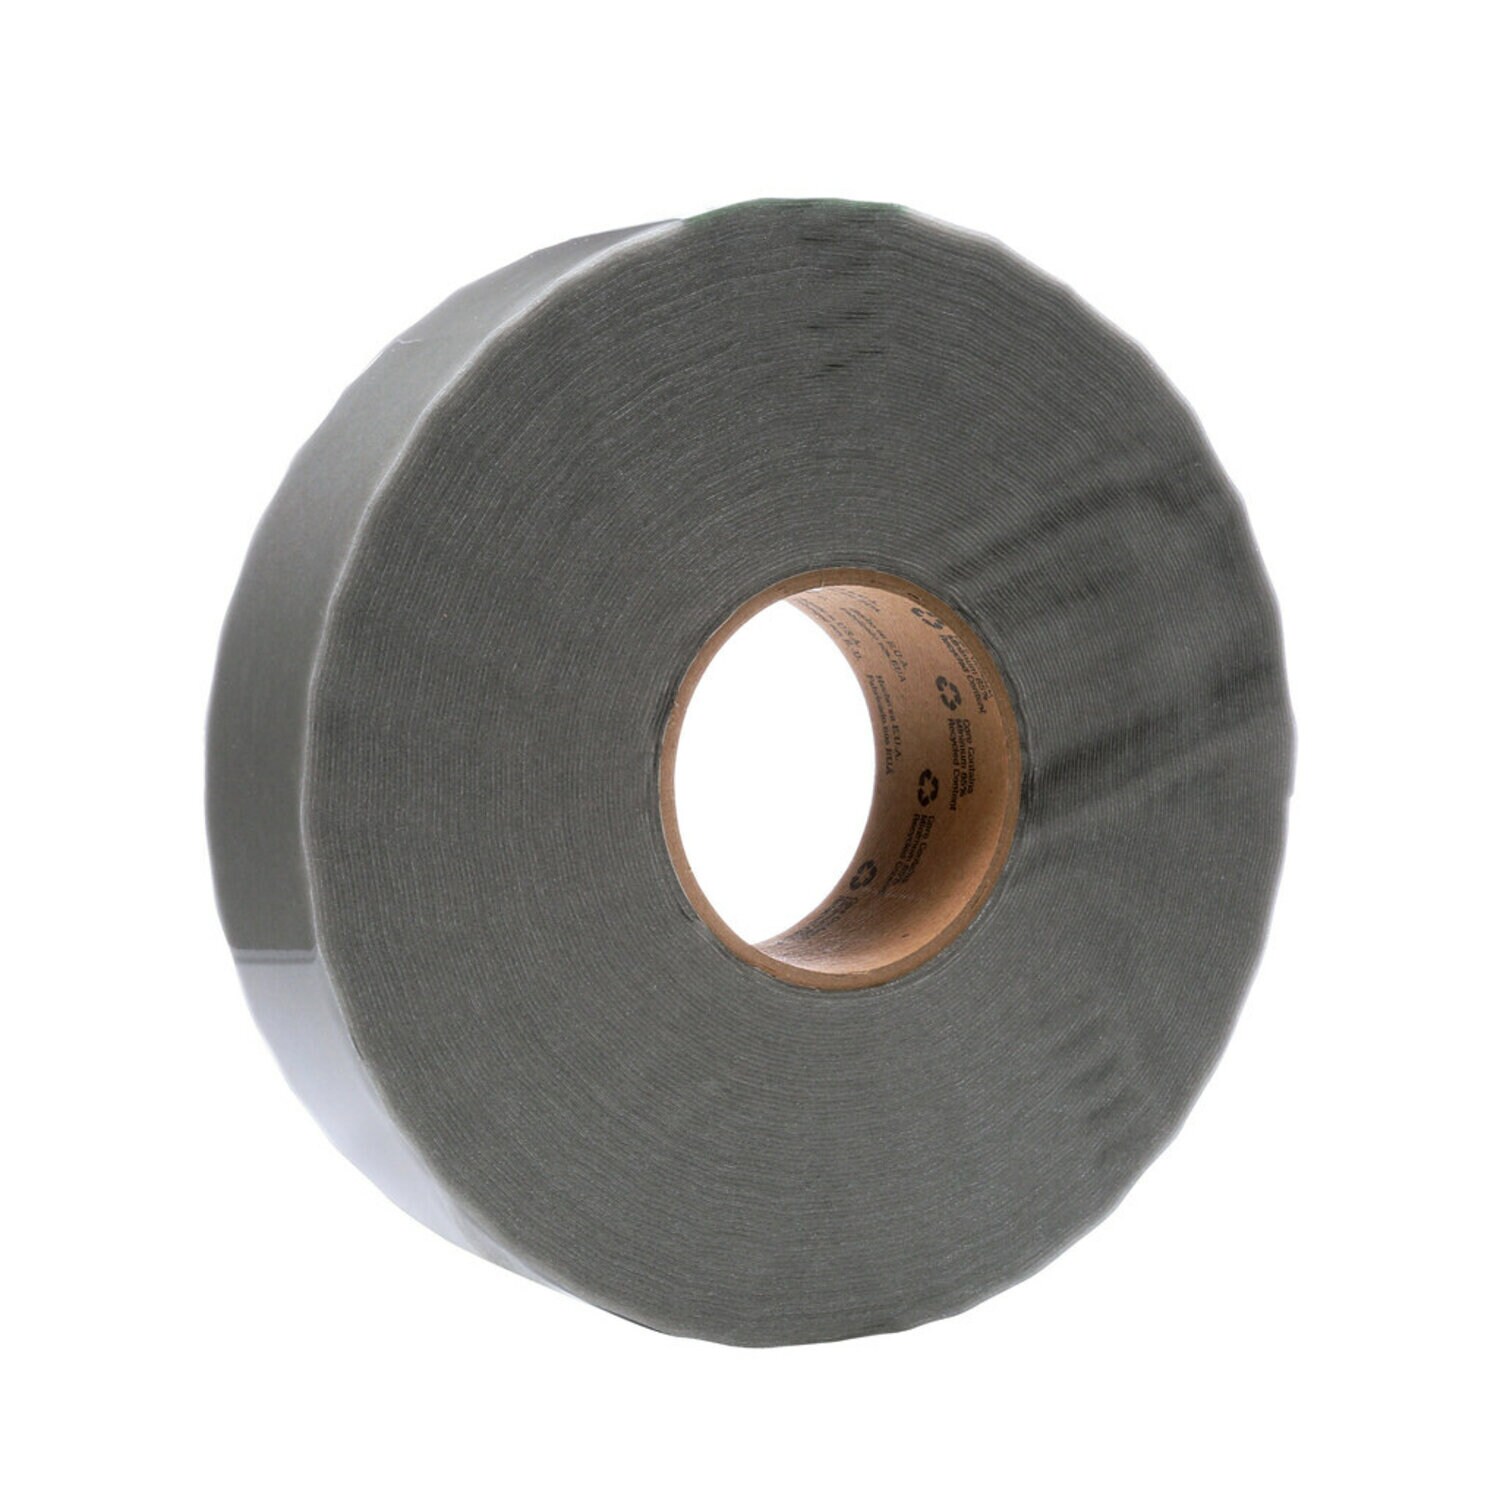 7100169718 - 3M Extreme Sealing Tape 4411G, Gray, 1 in x 36 yd, 40 mil, 9 rolls per
case